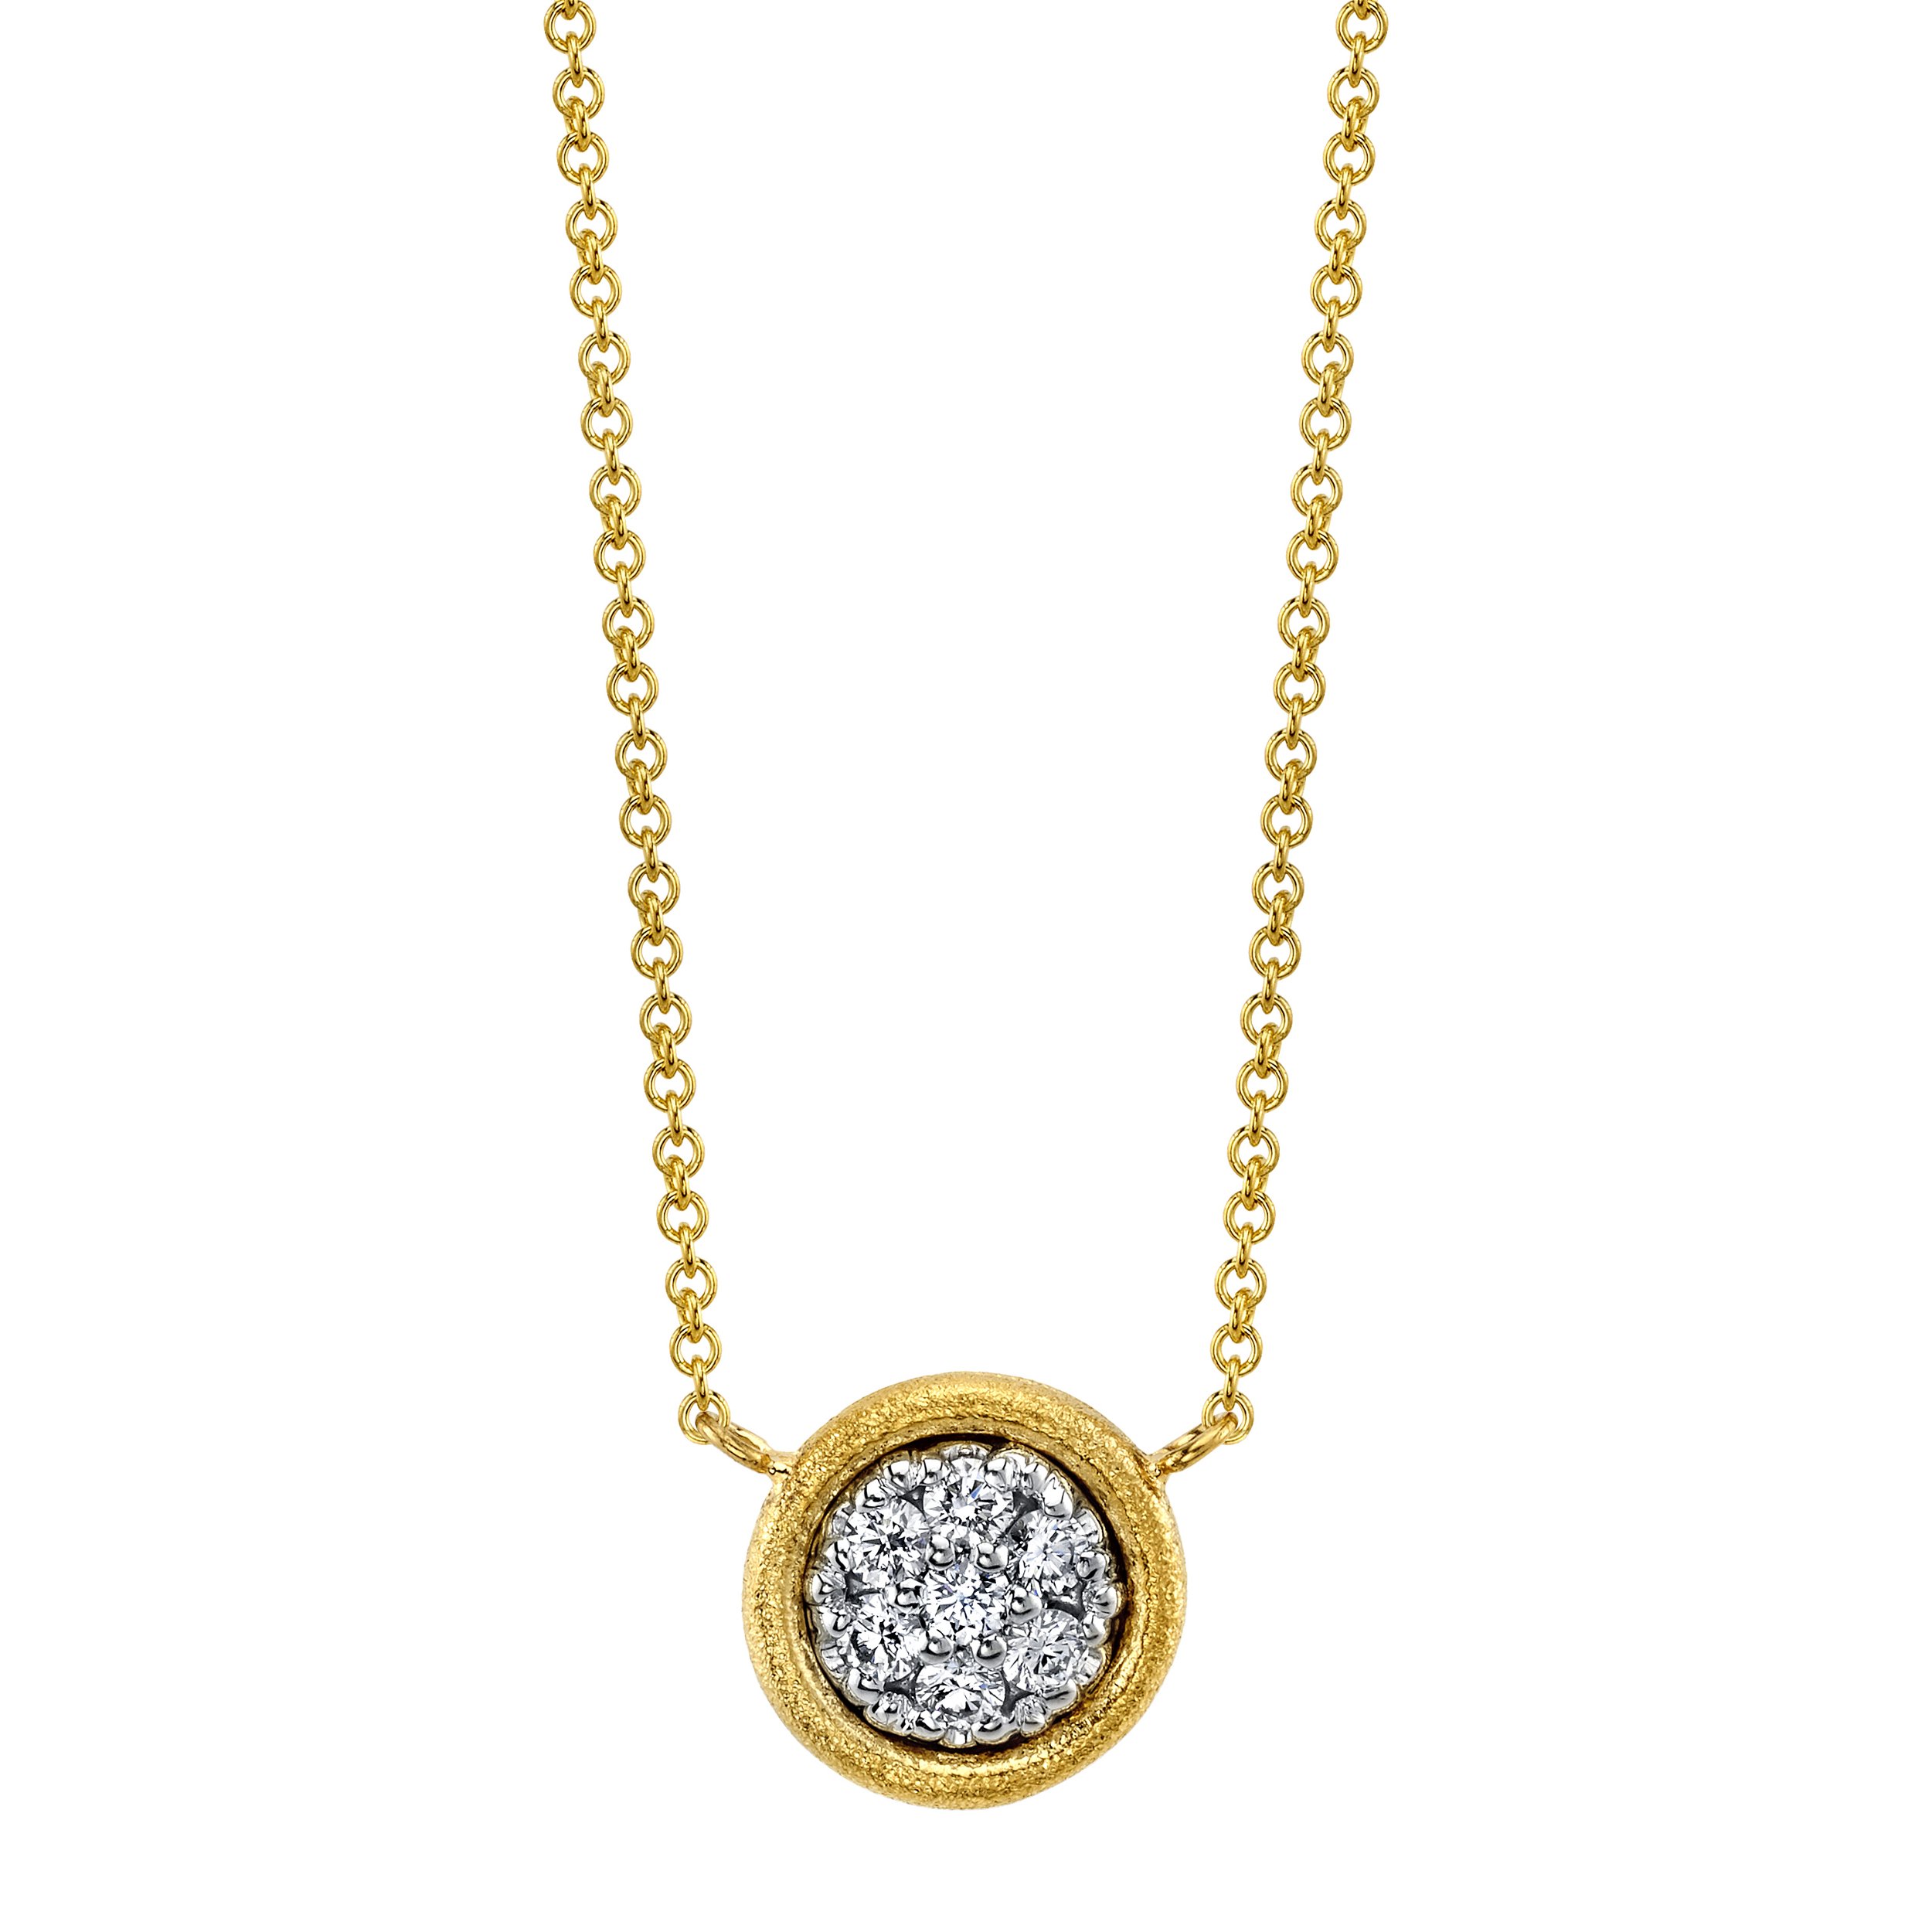 Diamond Pave Pendant with Aspen Finish in 18kt Yellow Gold